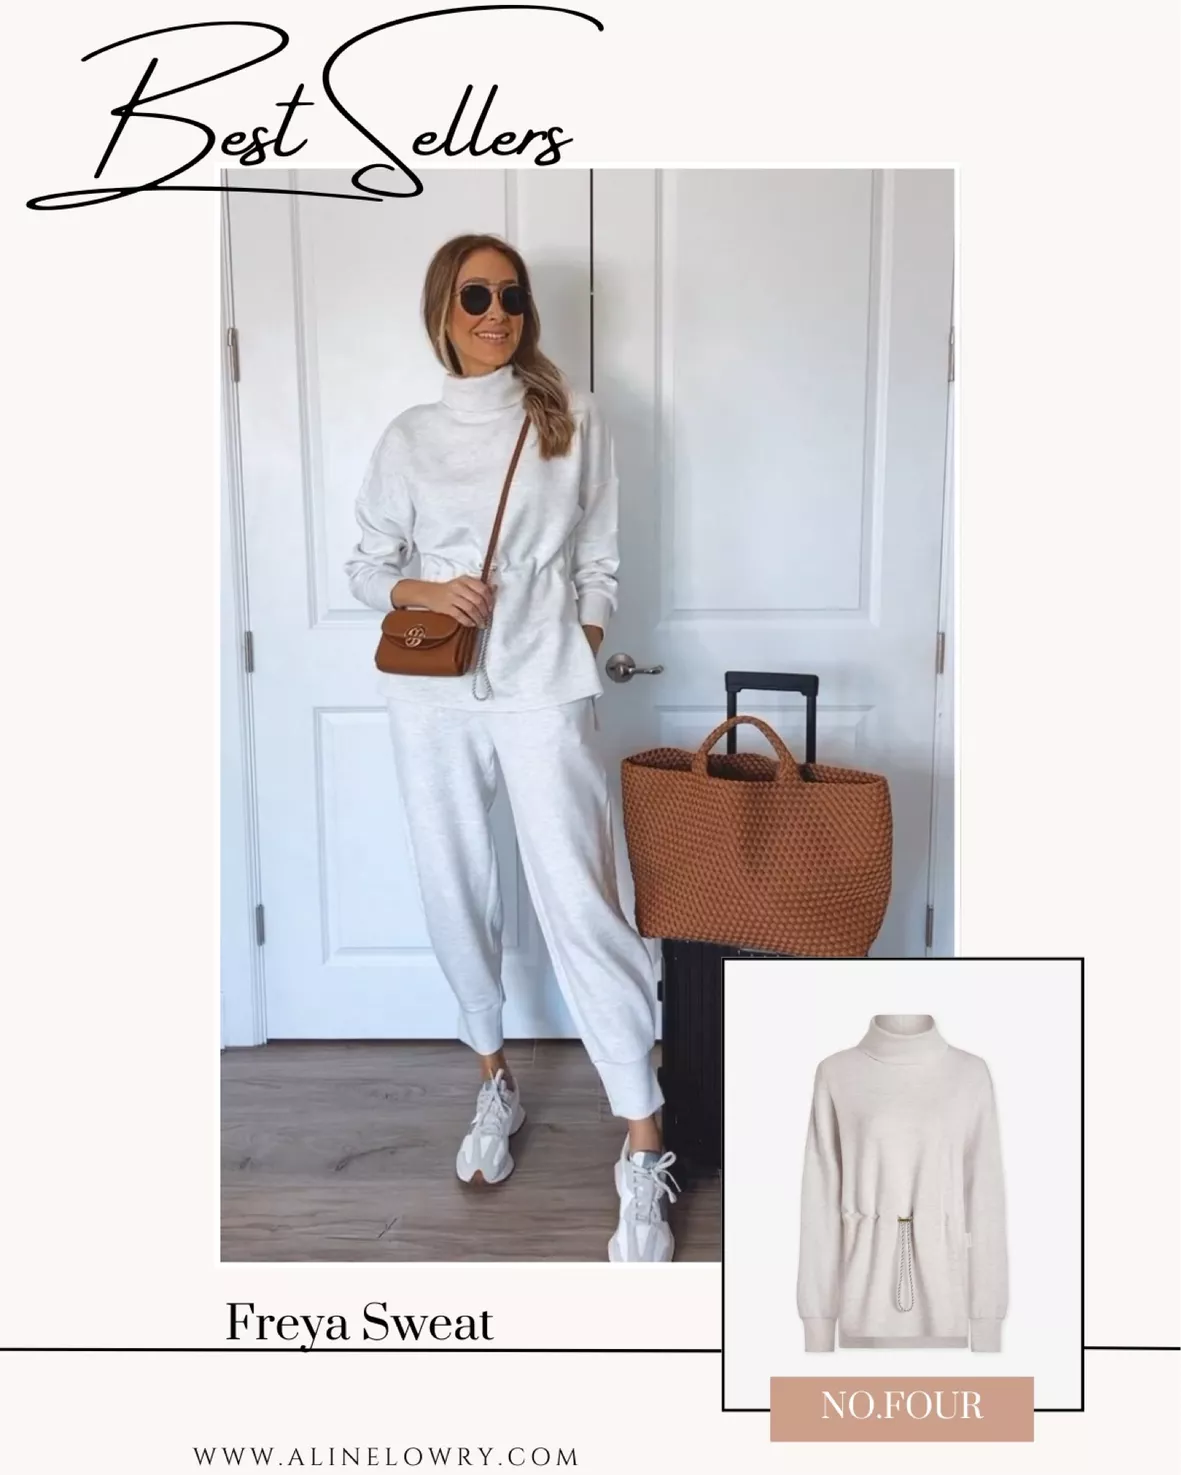 Urban Outfitters - Airport Outfit curated on LTK